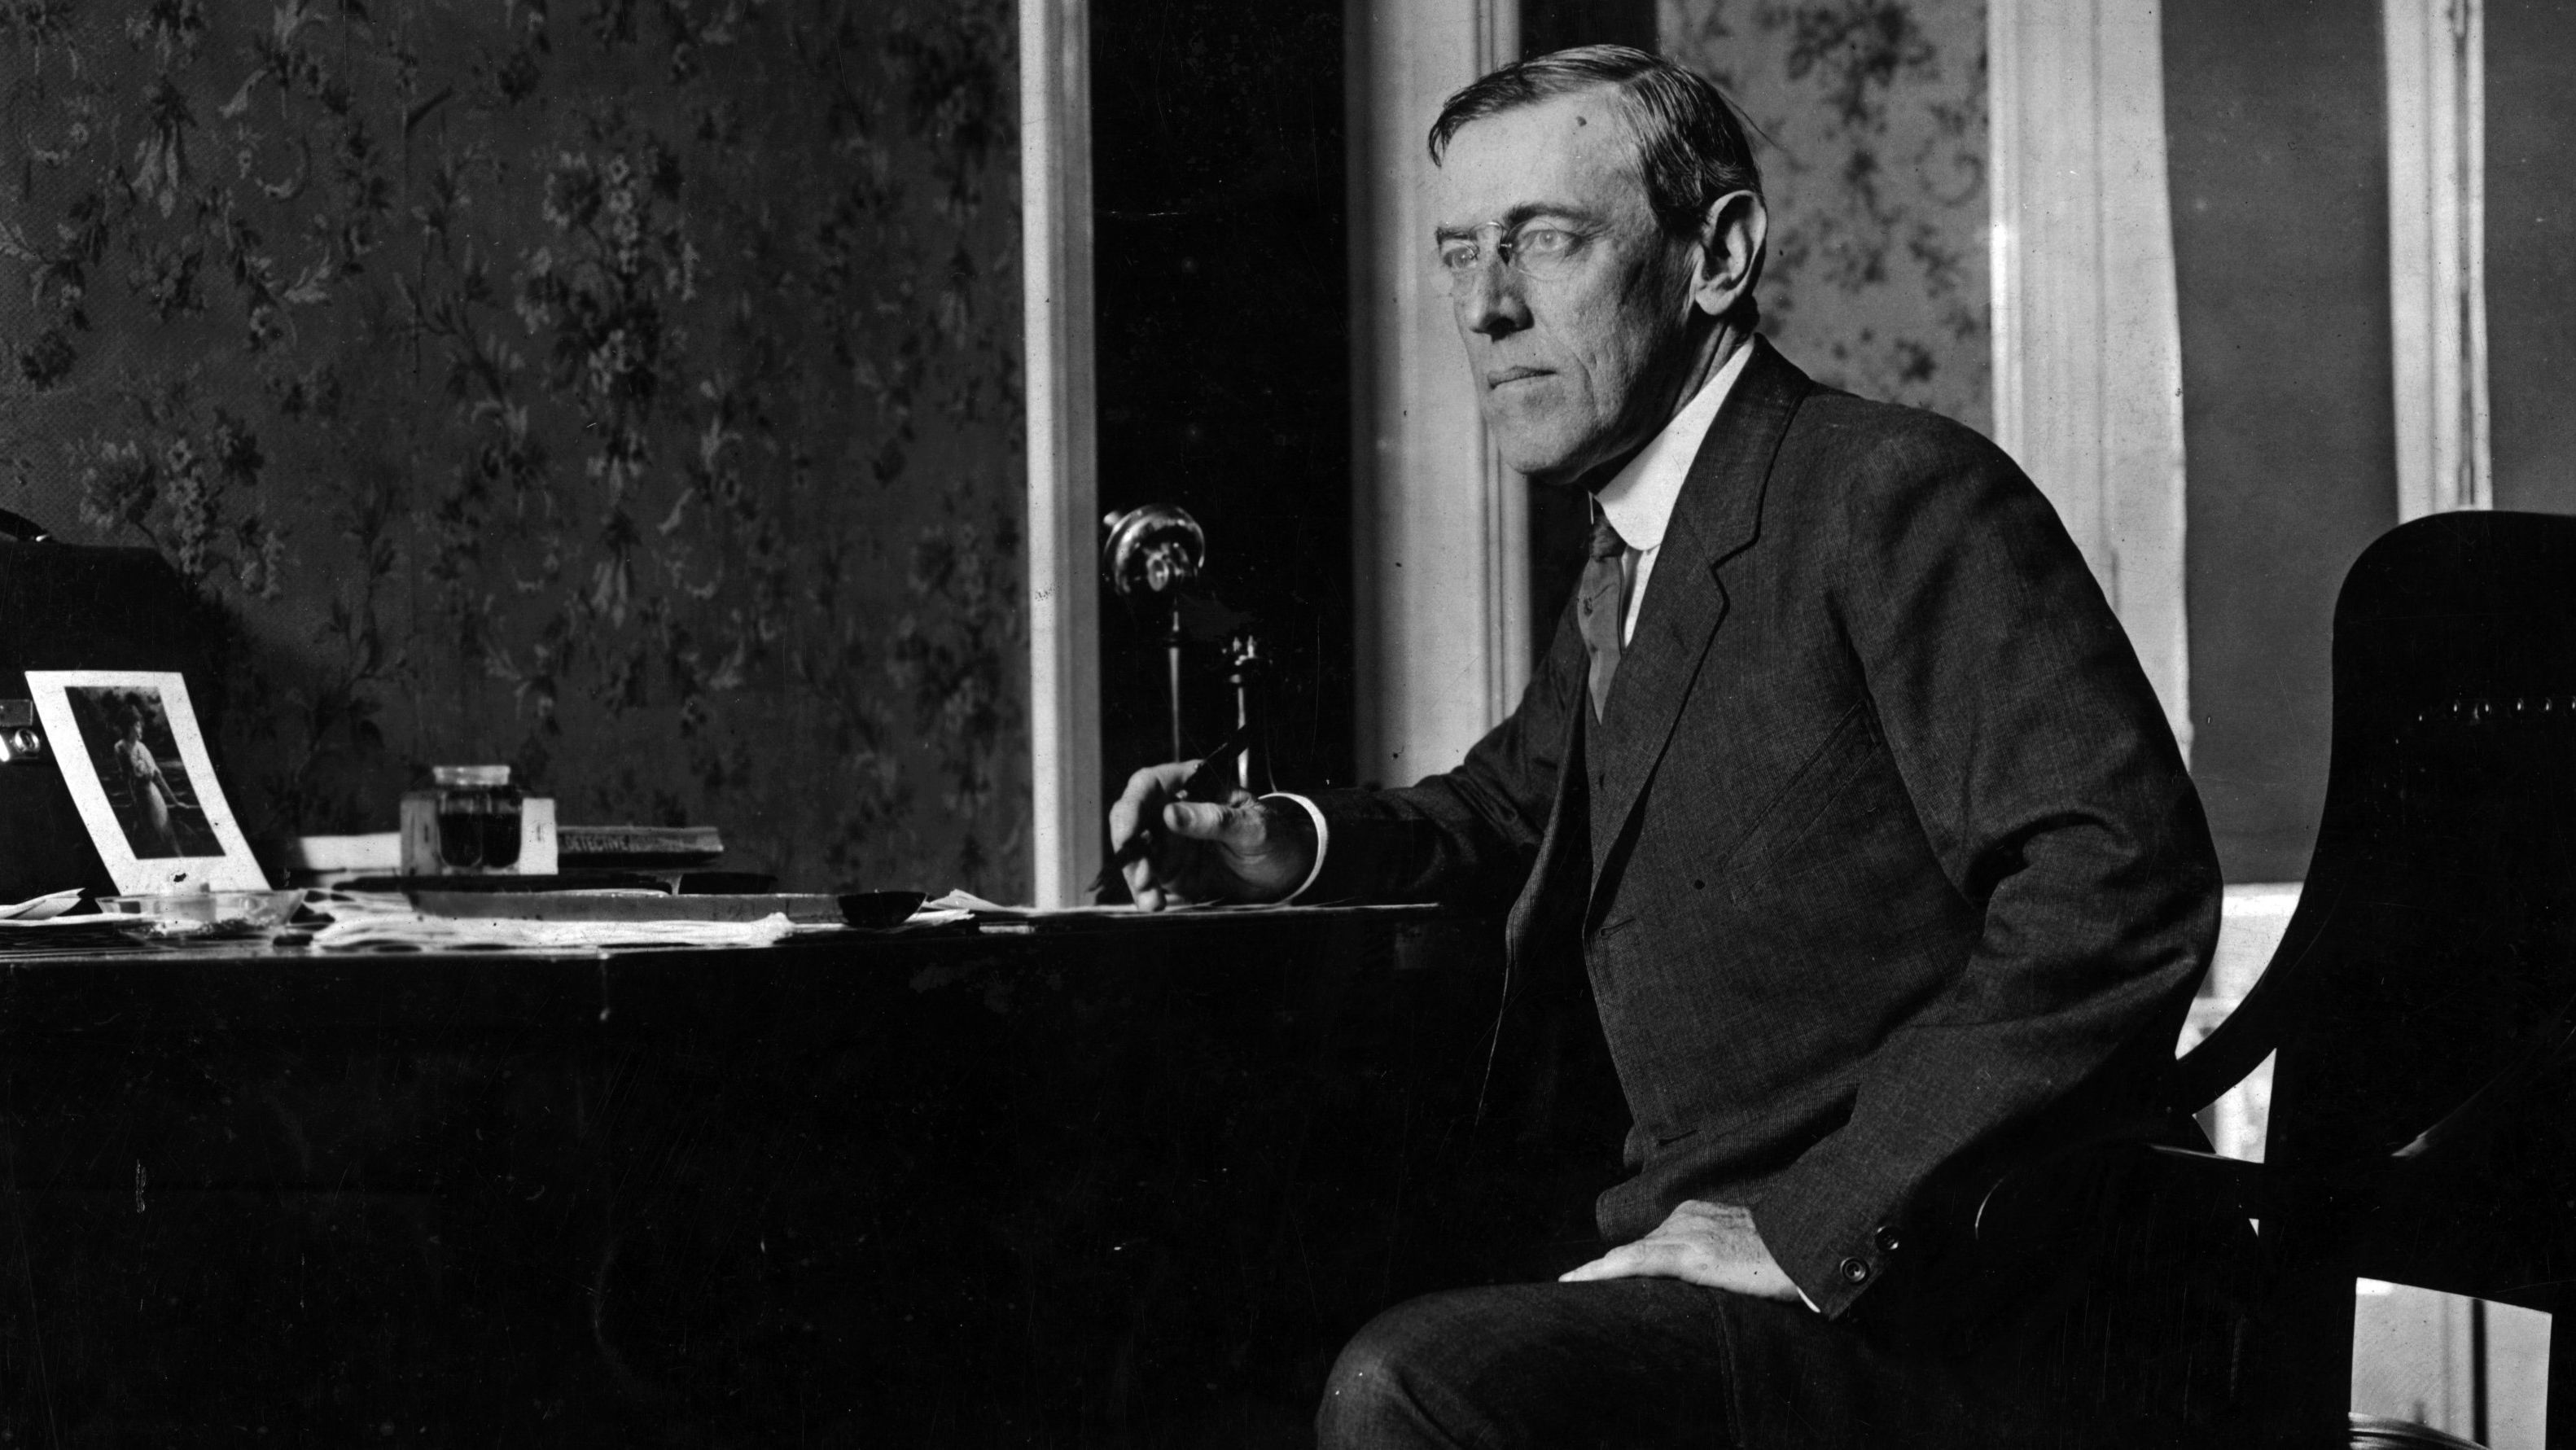 Woodrow Wilson, who served as President from 1913 to 1921.